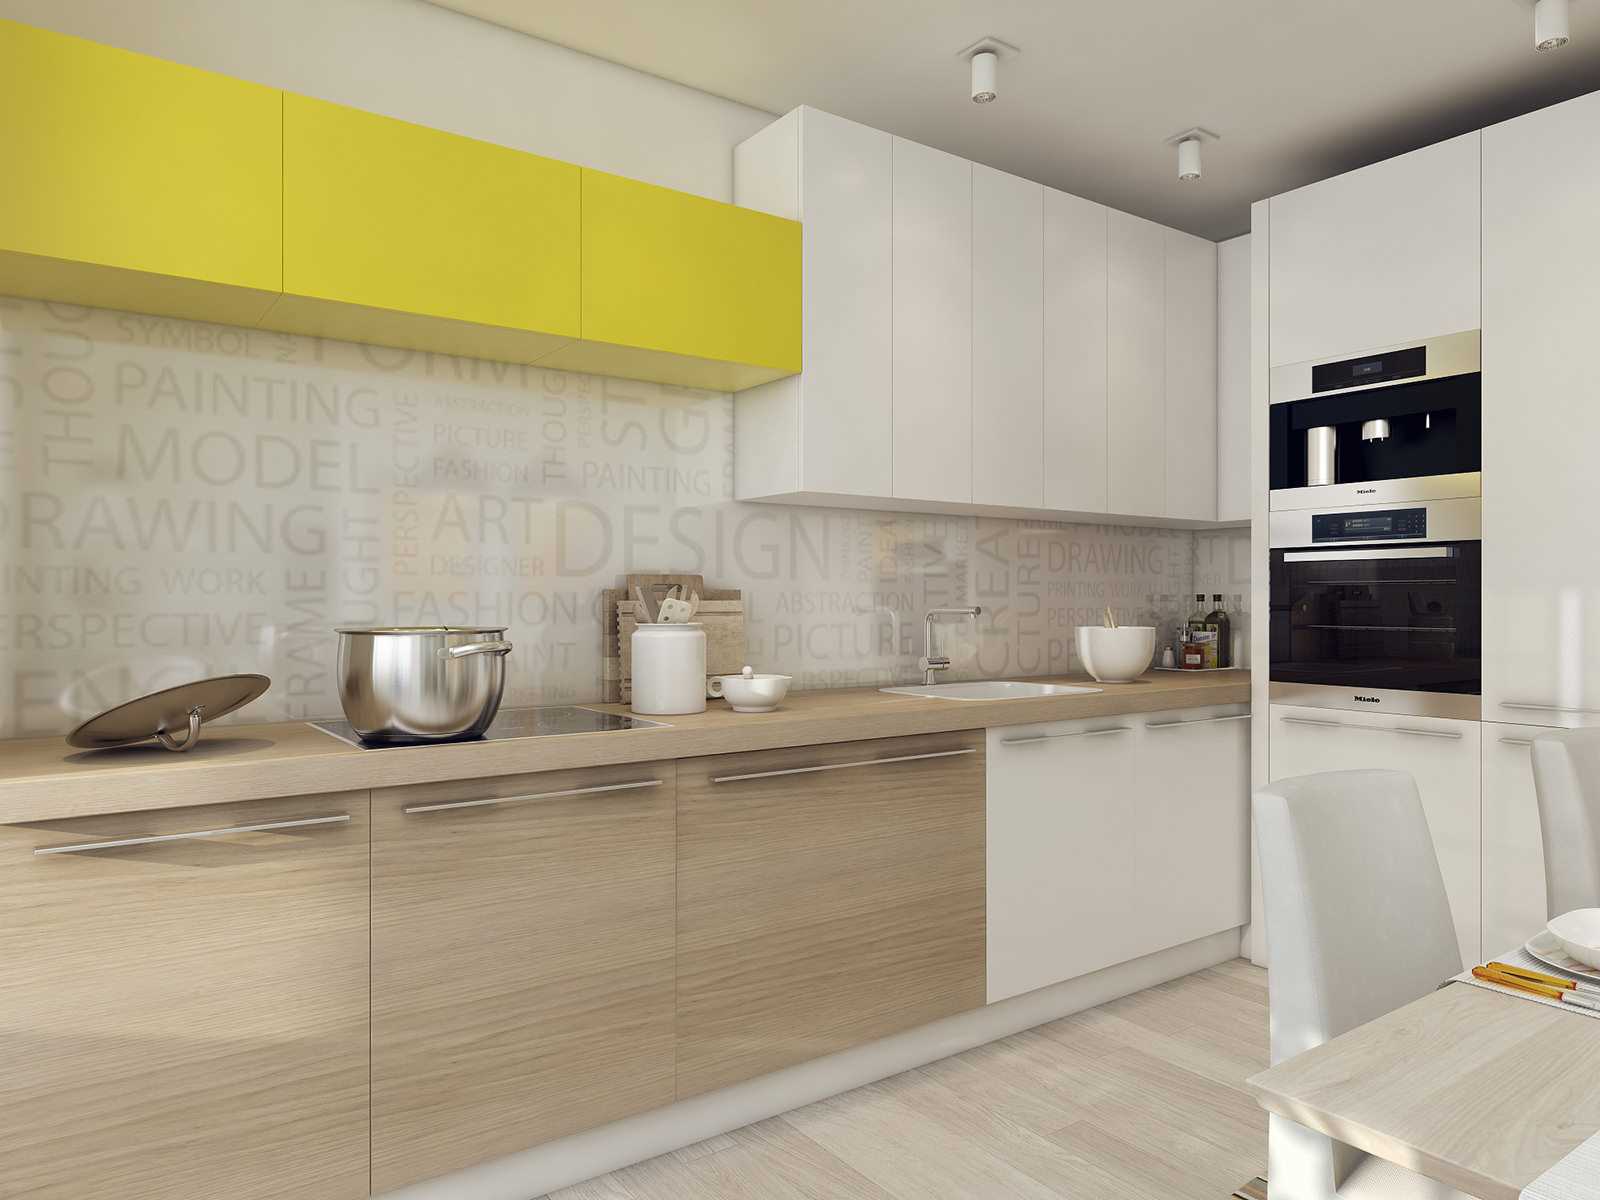 variant of the unusual design of the kitchen 3-room apartment